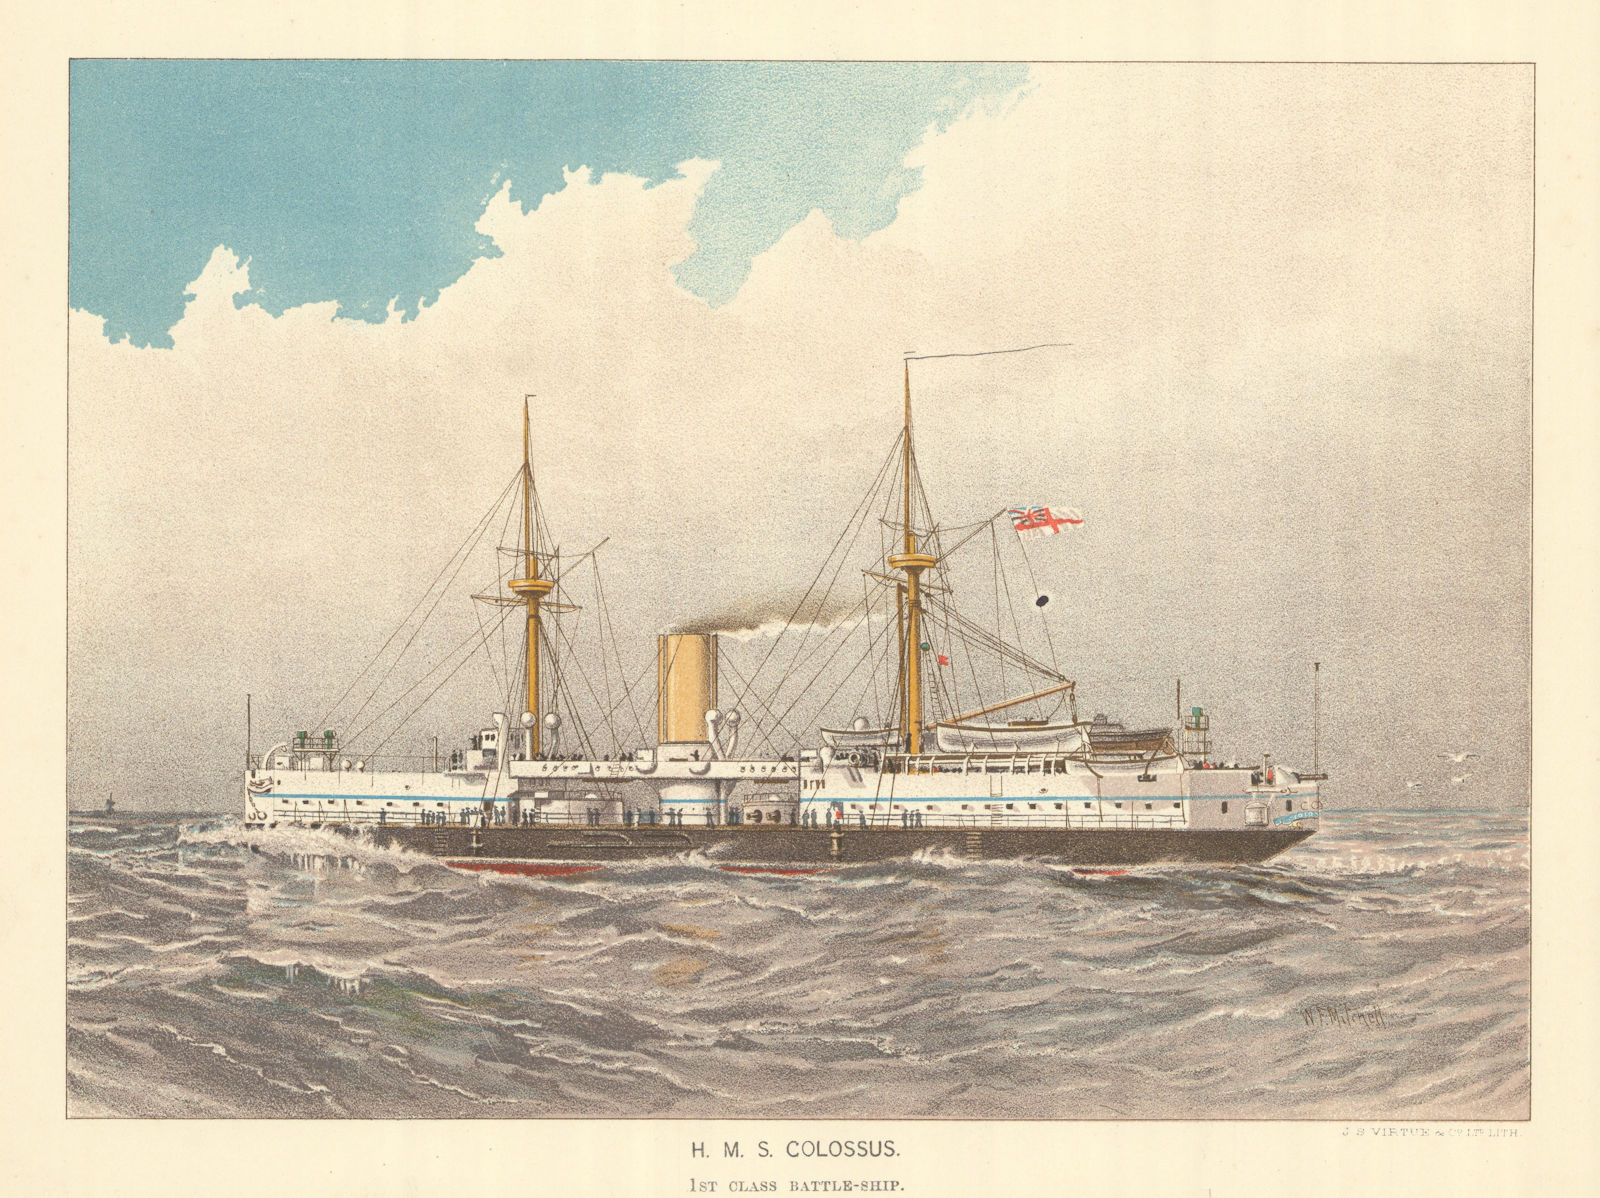 Associate Product H.M.S. "Colossus", 1st class battleship (1882) by W.F. Mitchell. Royal Navy 1893